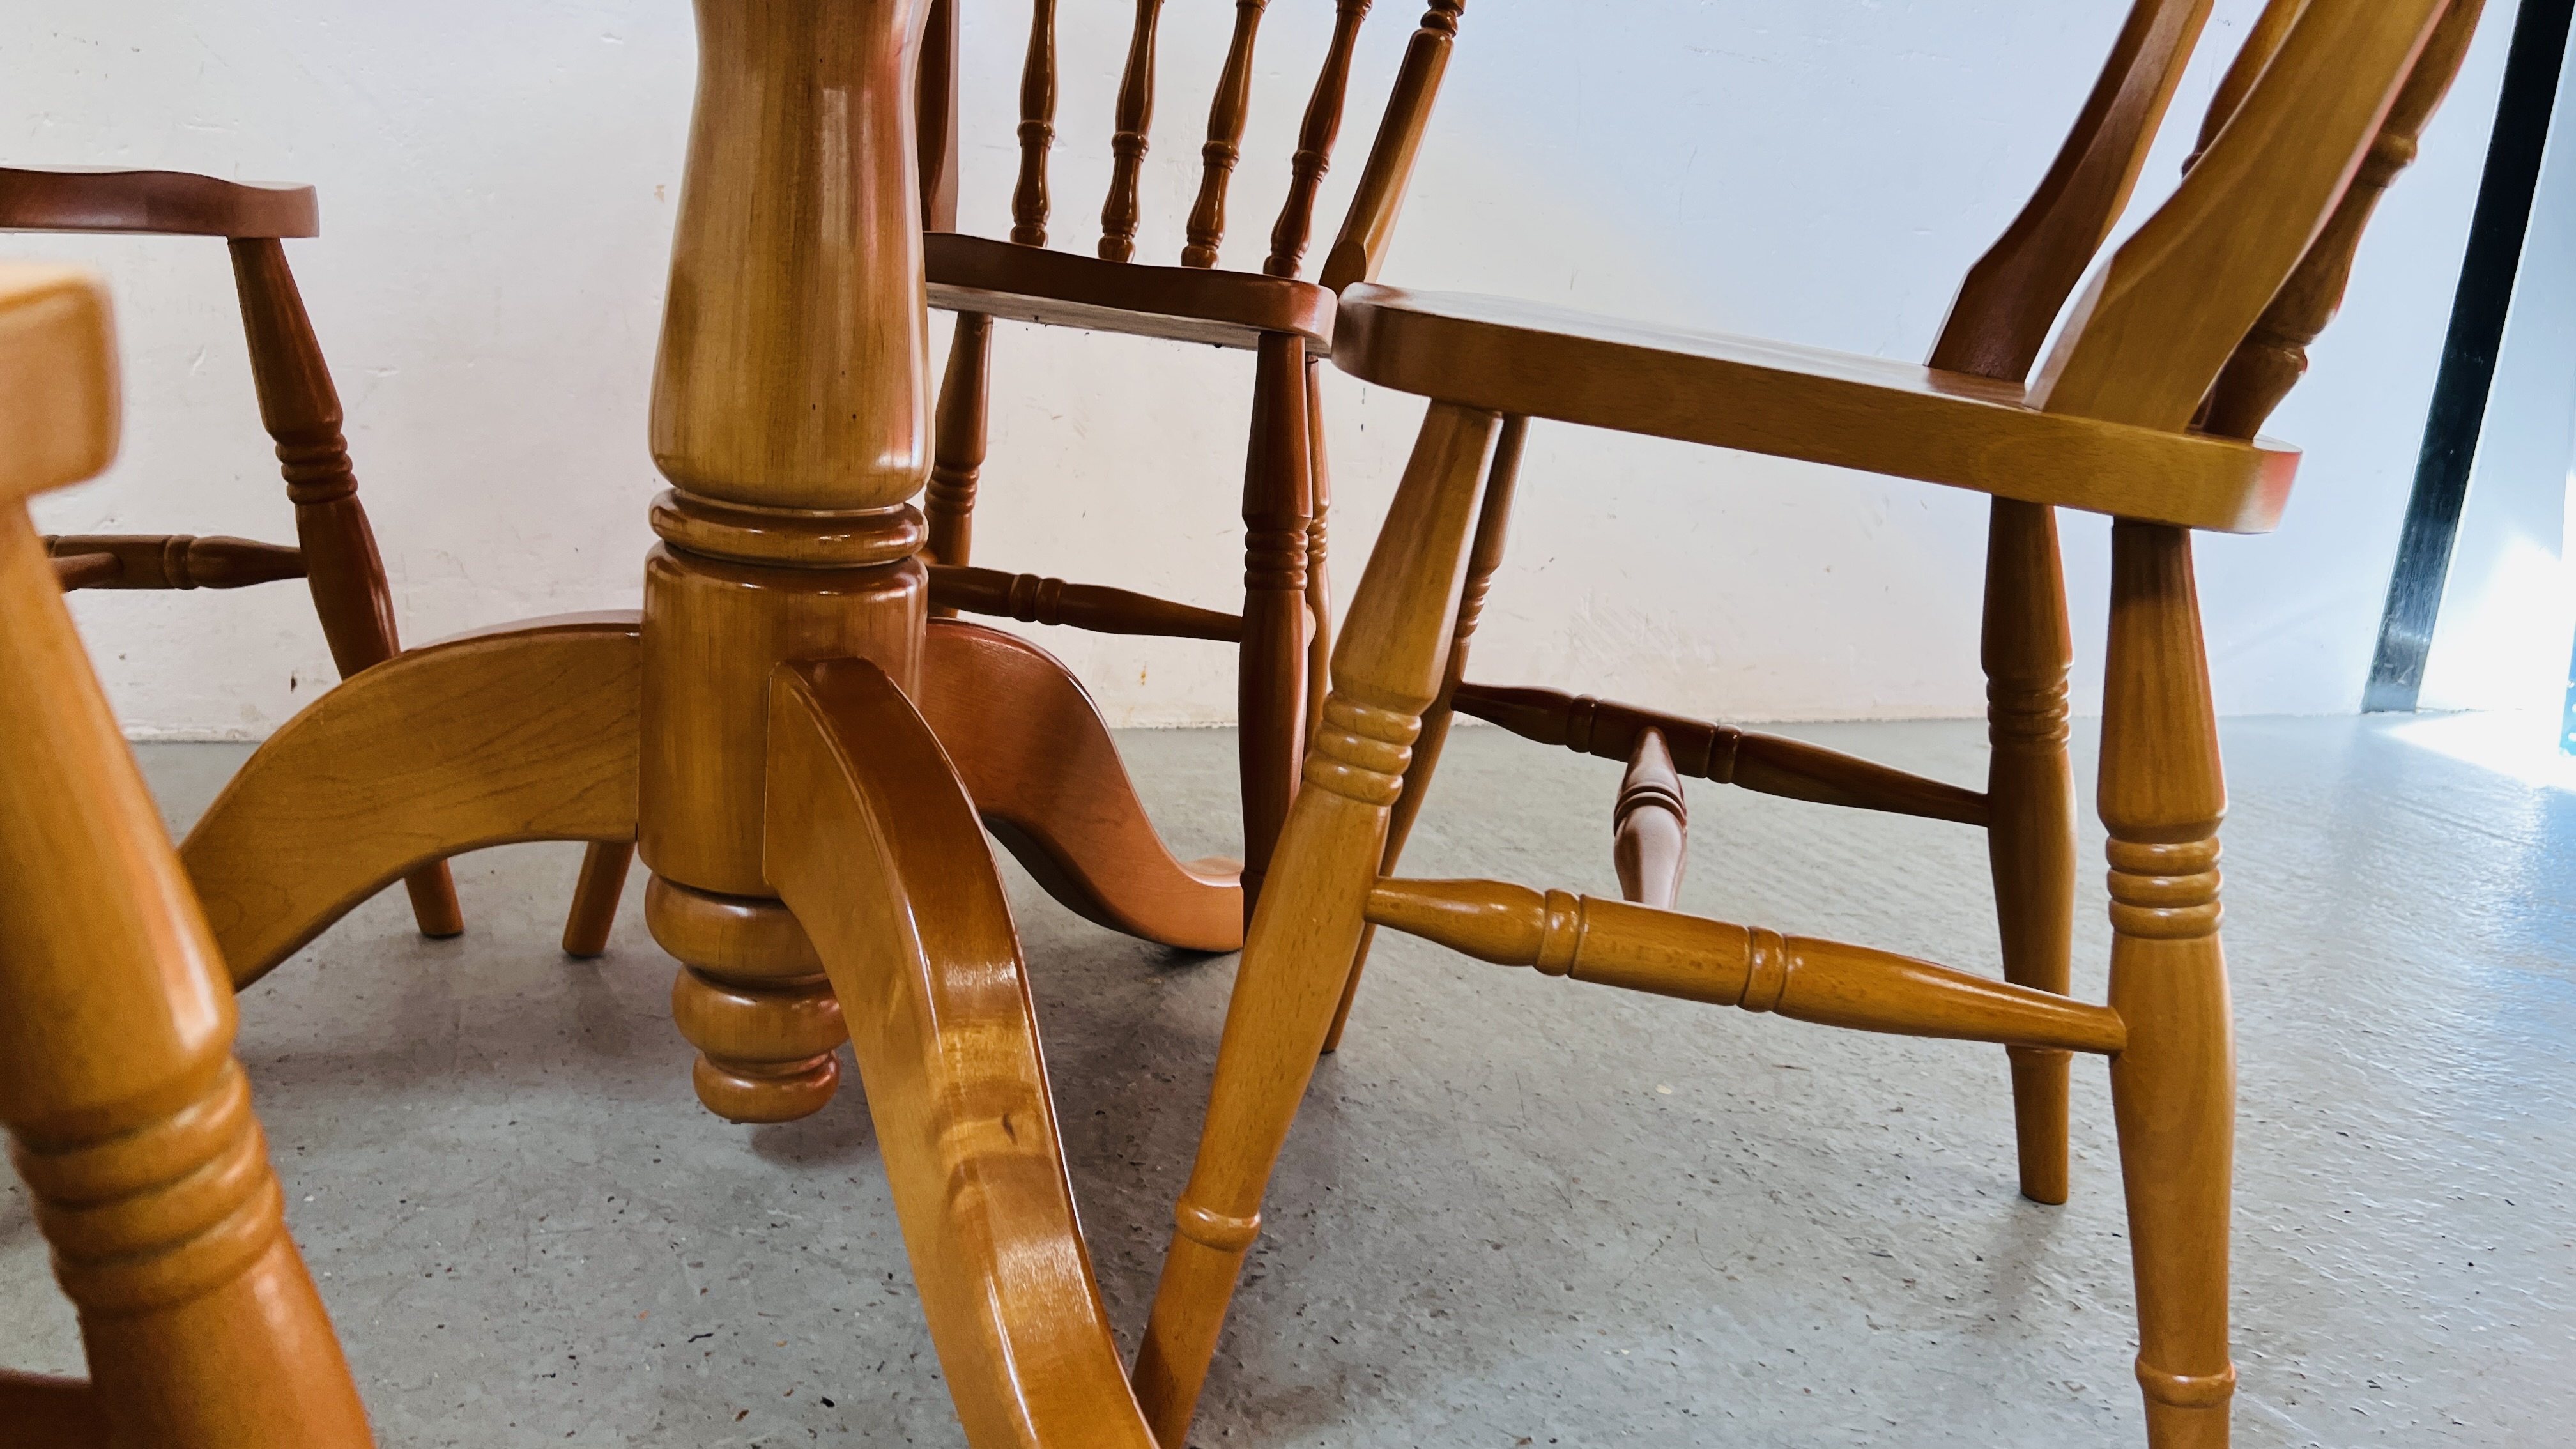 A SOLID MAPLE CIRCULAR TOPPED DINING TABLE ON PEDESTAL BASE ALONG WITH 4 BEACH CHAIRS IN CHERRY - Image 10 of 10